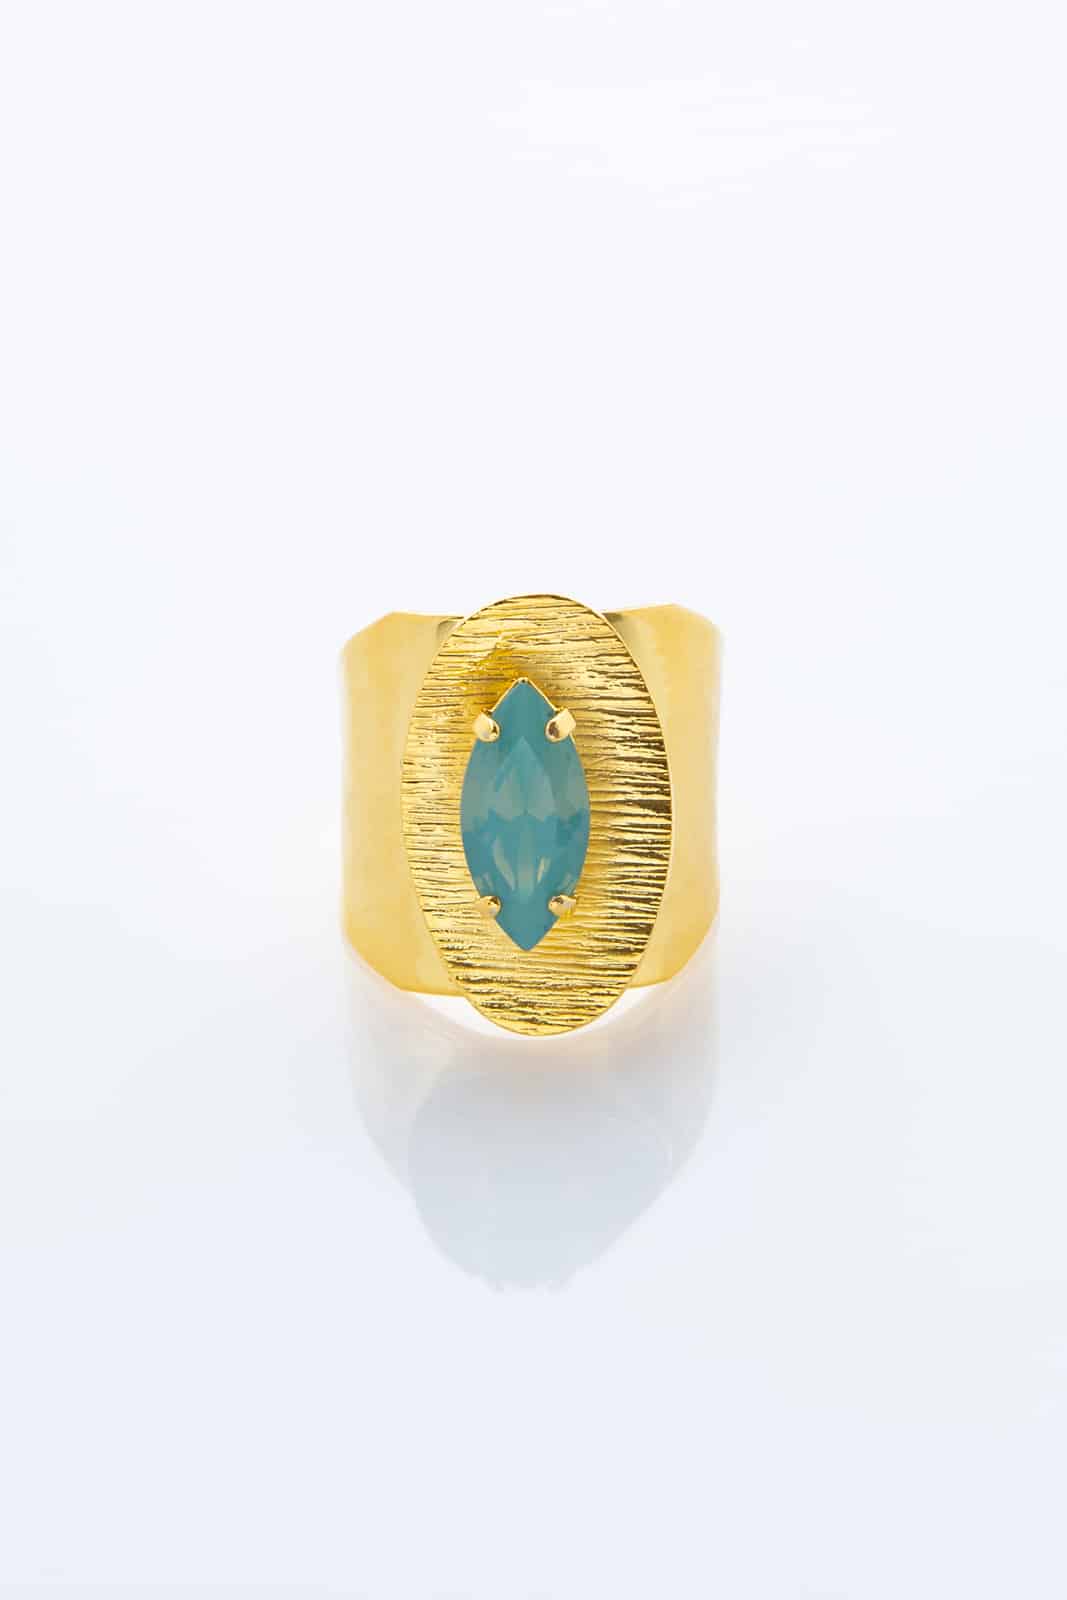 GOLD PLATED PACIFIC OPAL ZIRGON RING